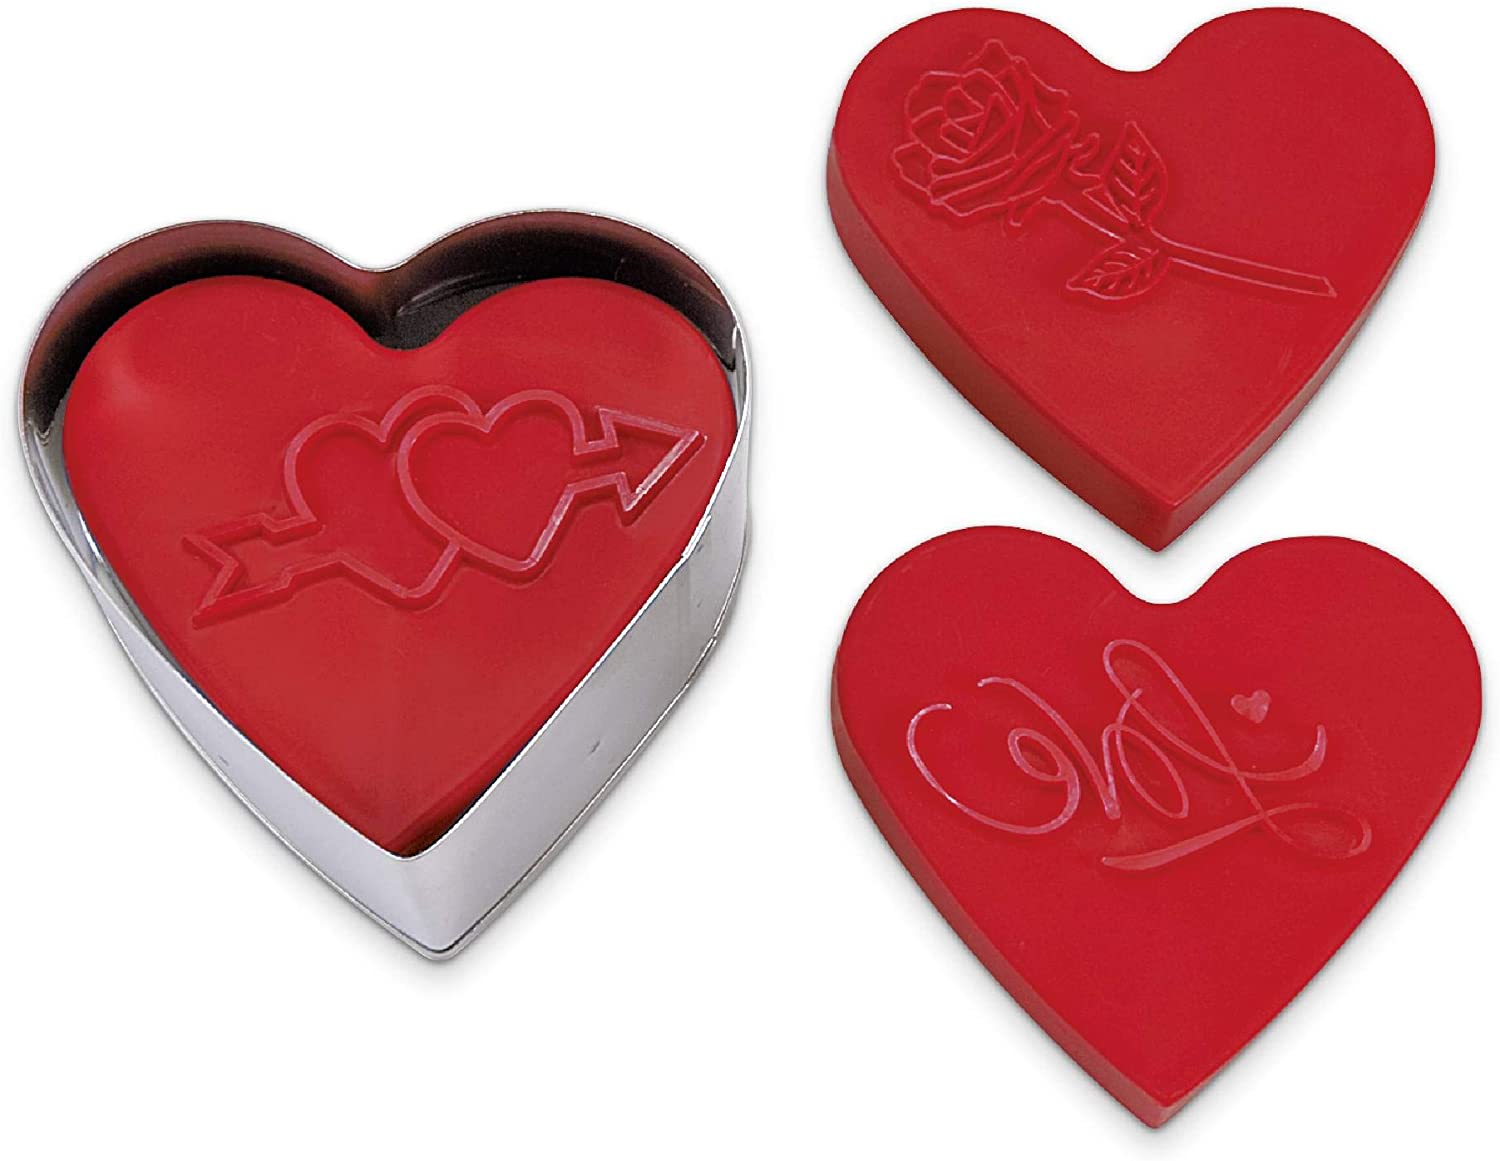 Staedter Städter Heart Cookie Cutter with Ejector Stainless Steel 6 x 6 x 4 cm Silver / Red